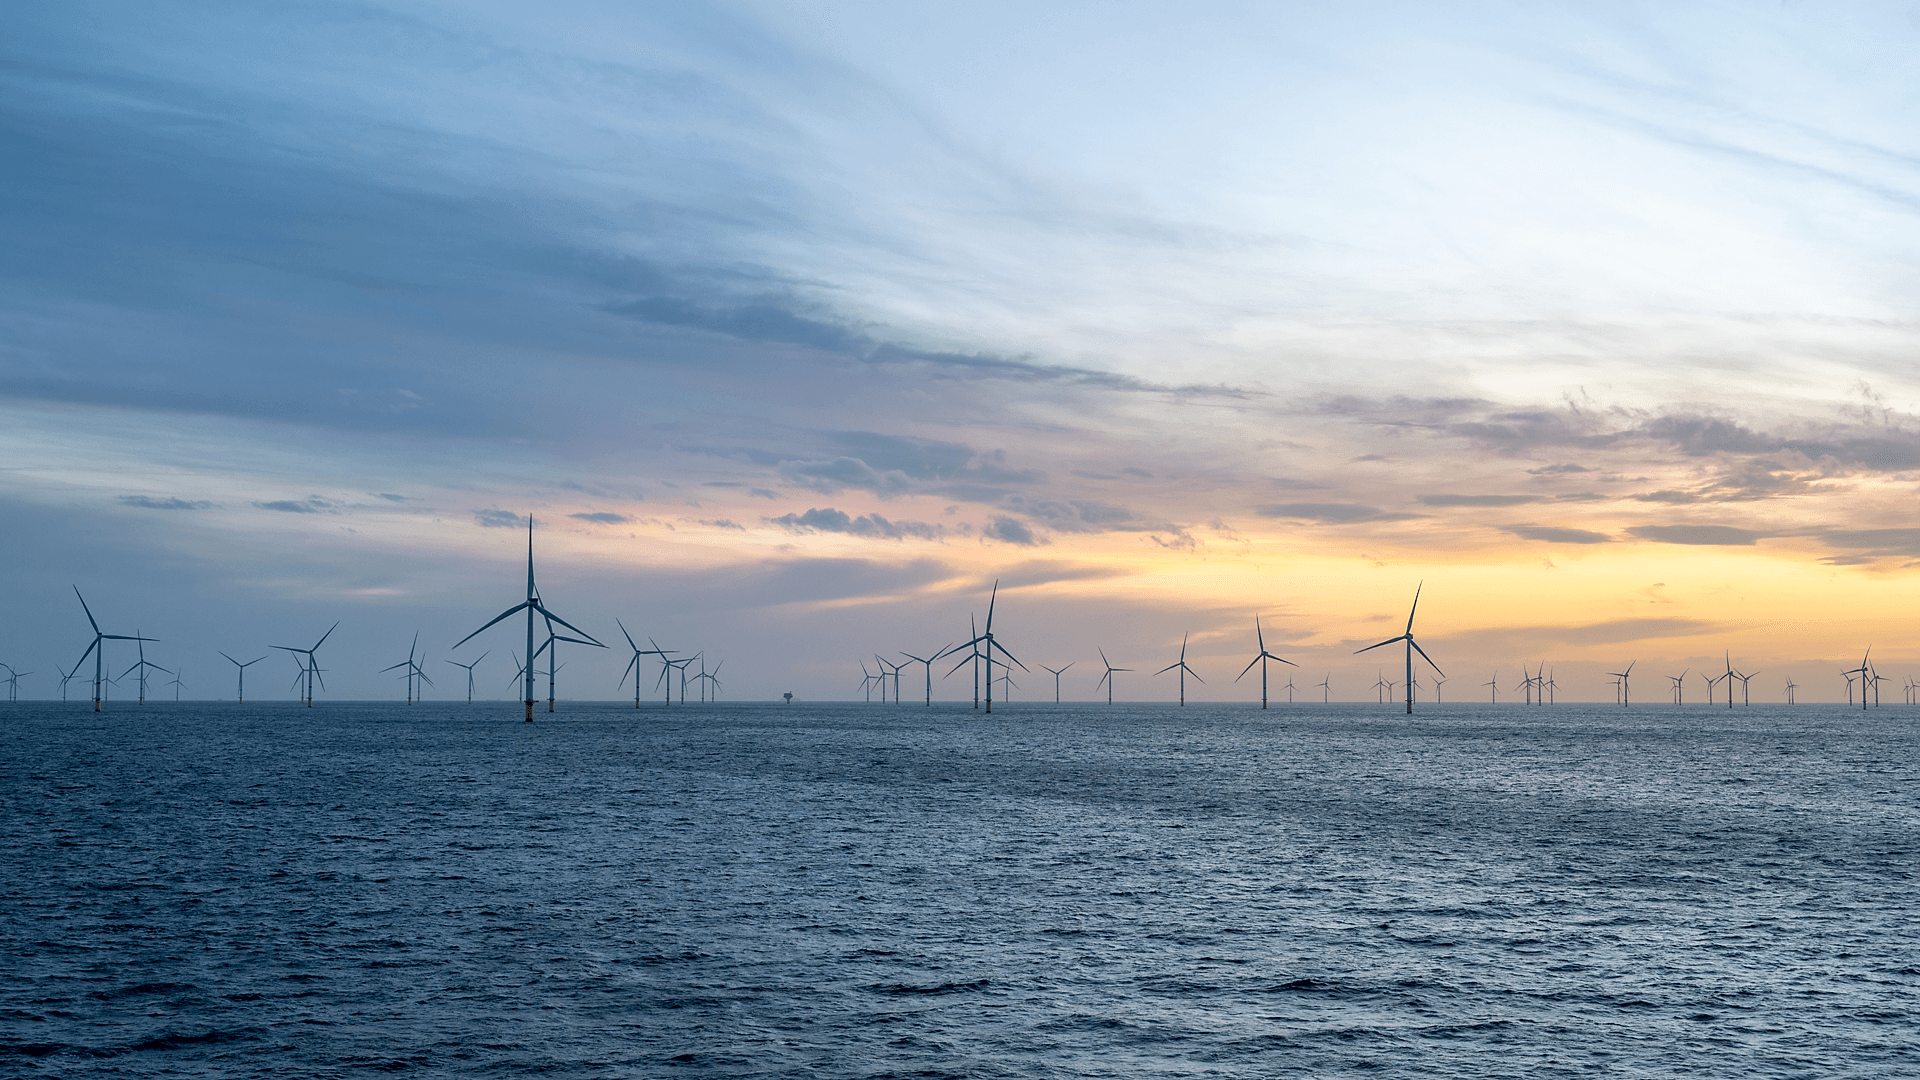 Offshore wind farm in the sunset